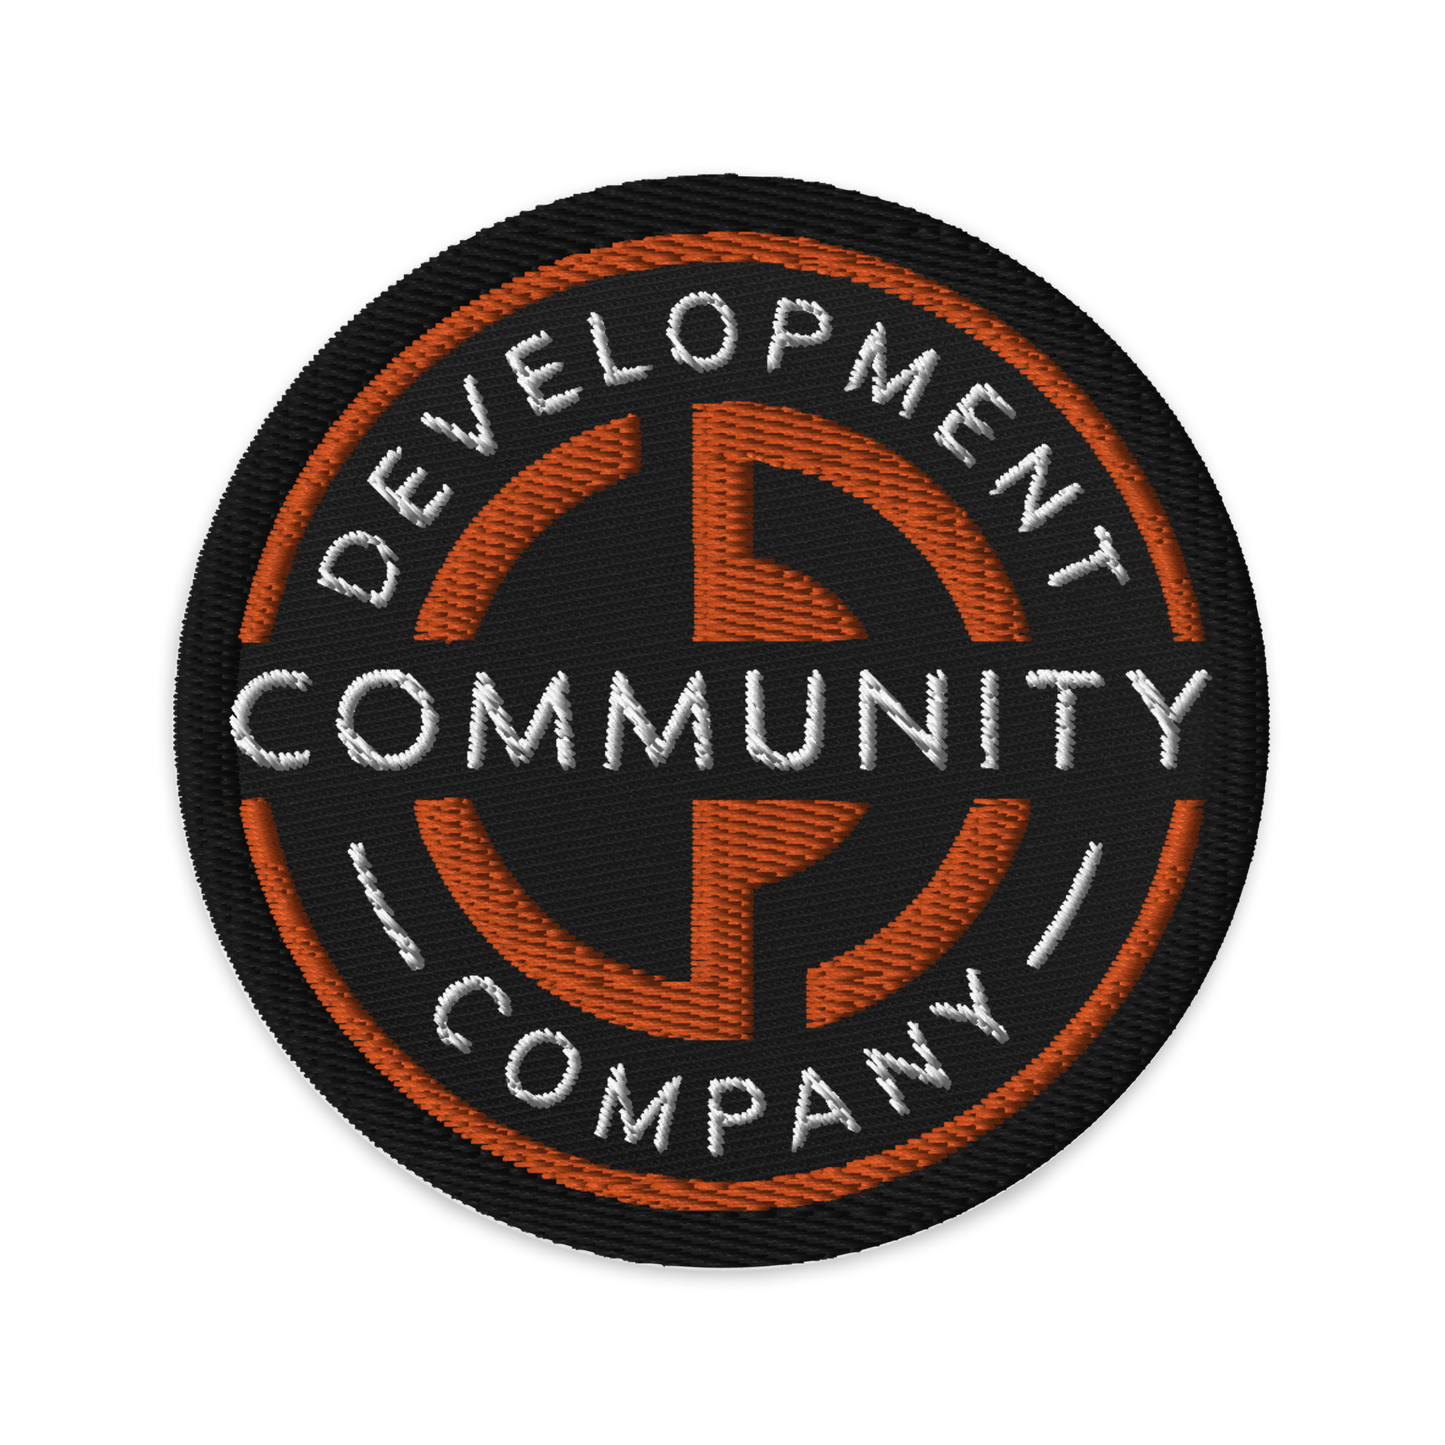 Community Development Company Badge Embroidered Patch